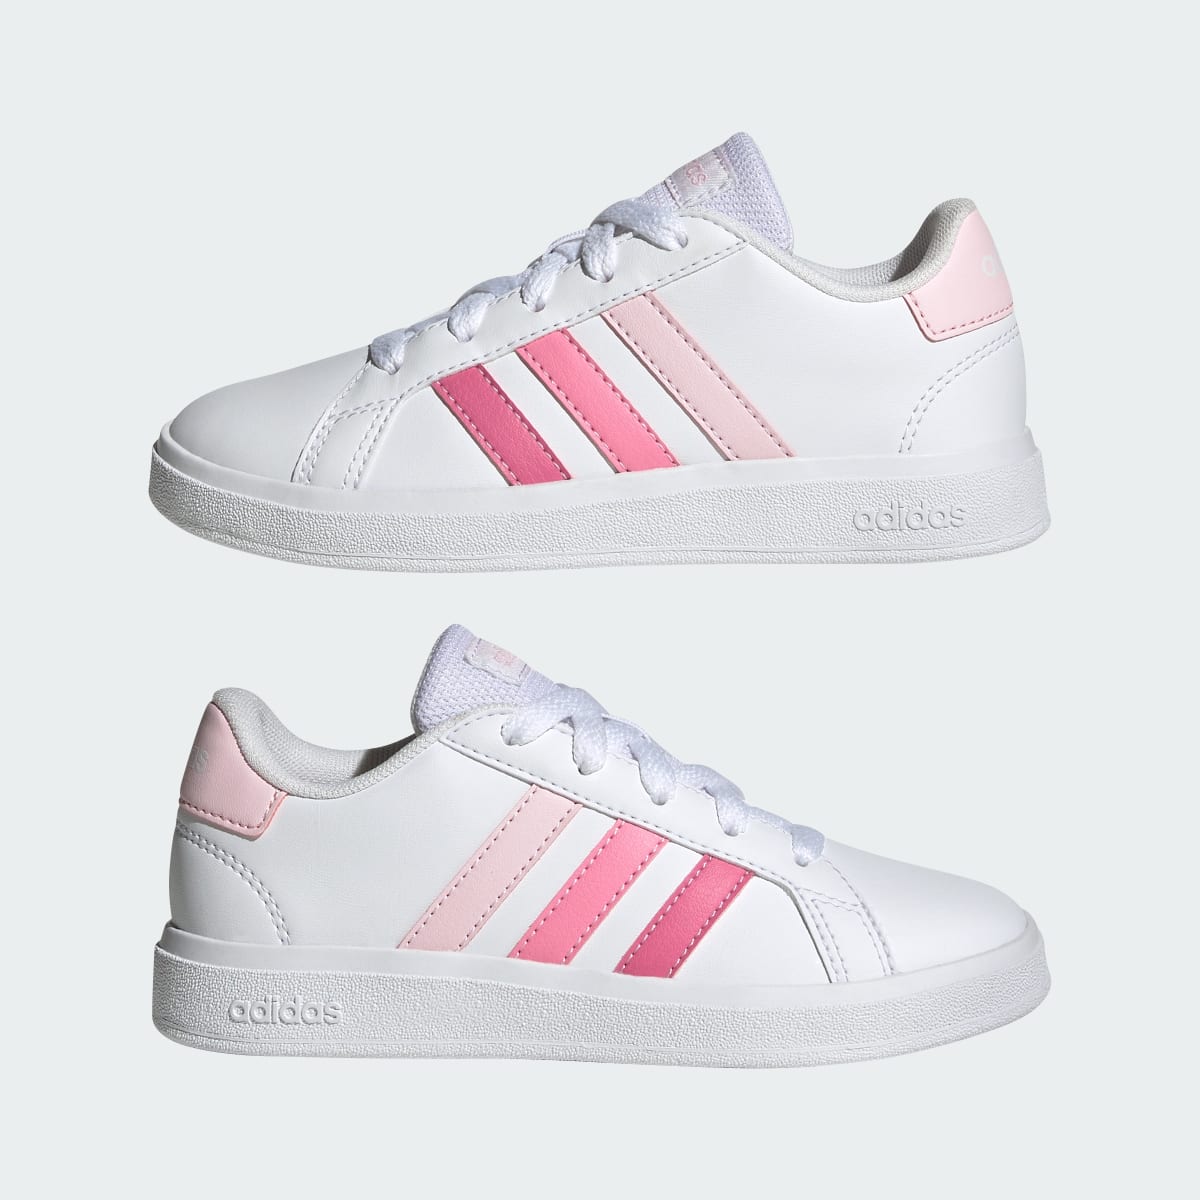 Adidas Grand Court Lifestyle Tennis Lace-Up Shoes. 8